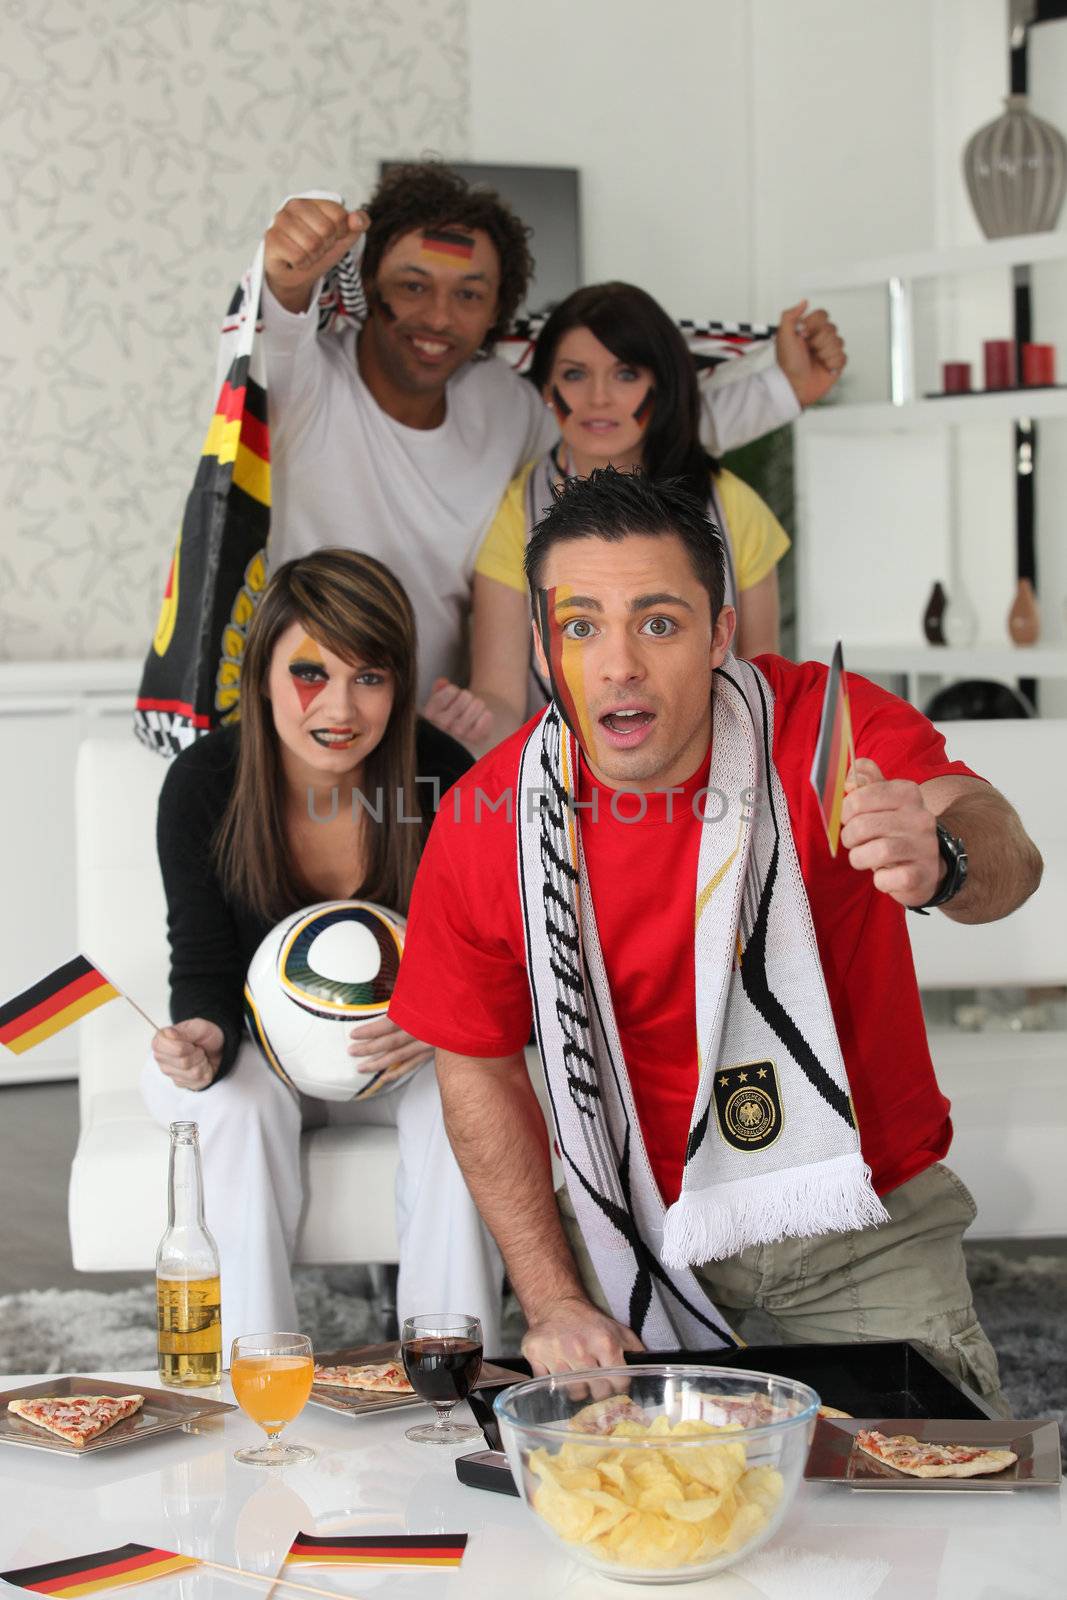 Supporters of Germany soccer team